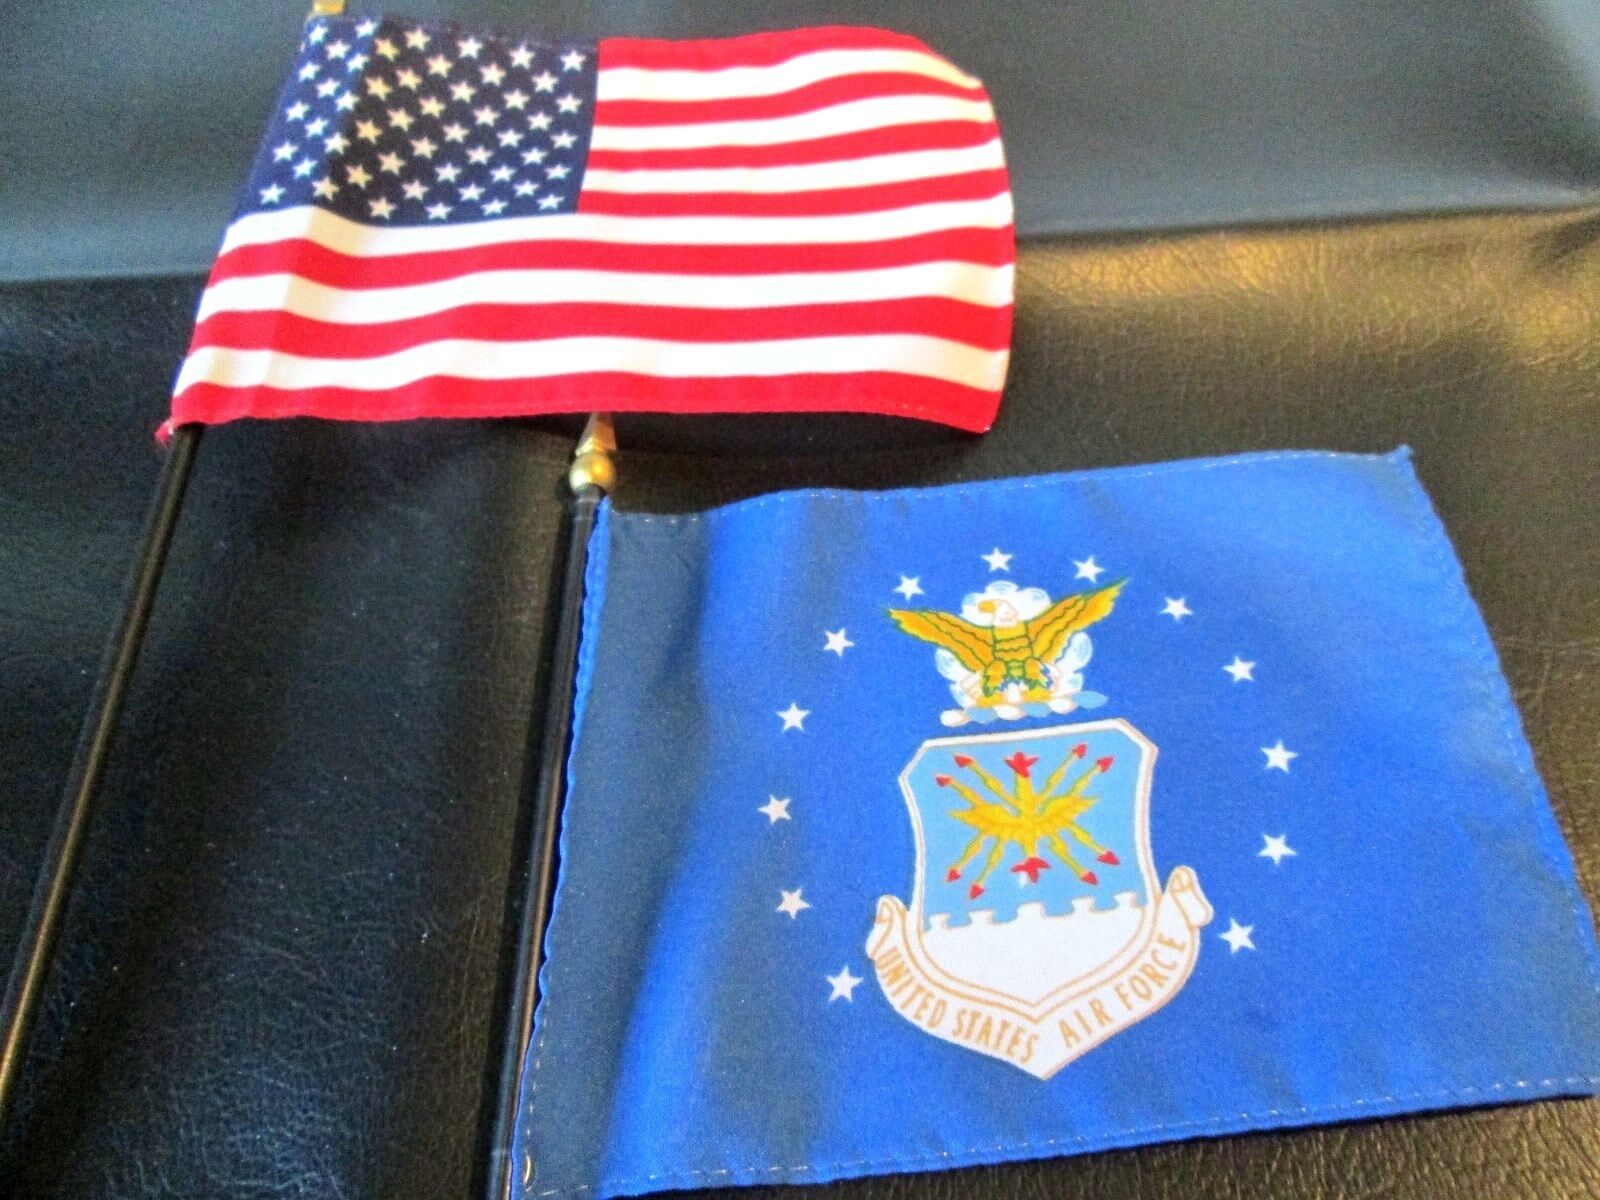 U.S.A. AND U.S. AIR FORCE  FLAGS - POLE - STAND